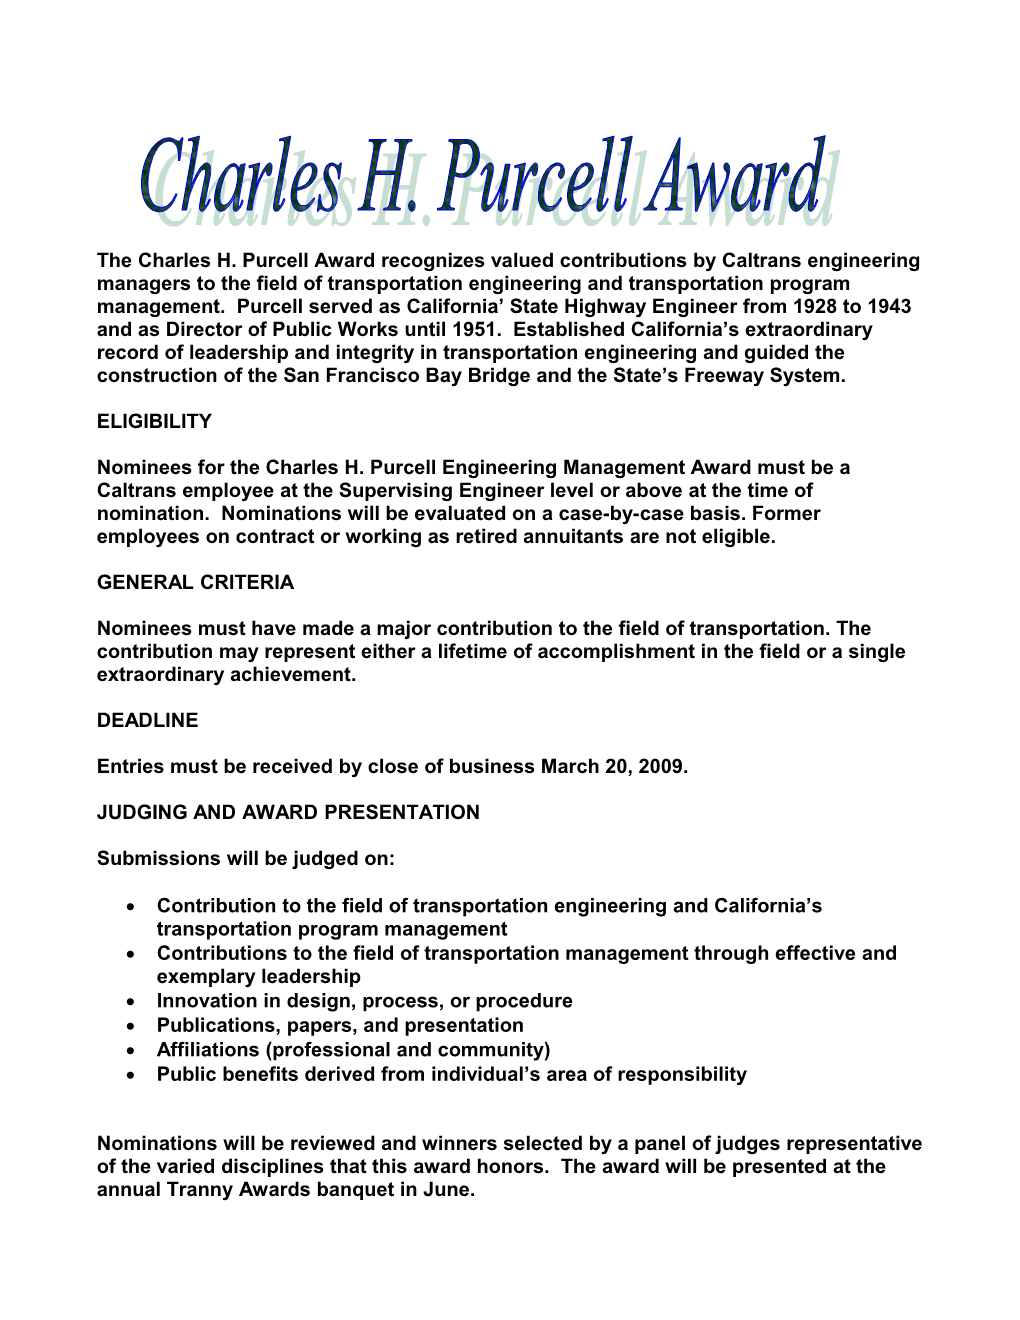 The Charles H. Purcell Award Recognizes Valued Contributions by Caltrans Engineering Managers